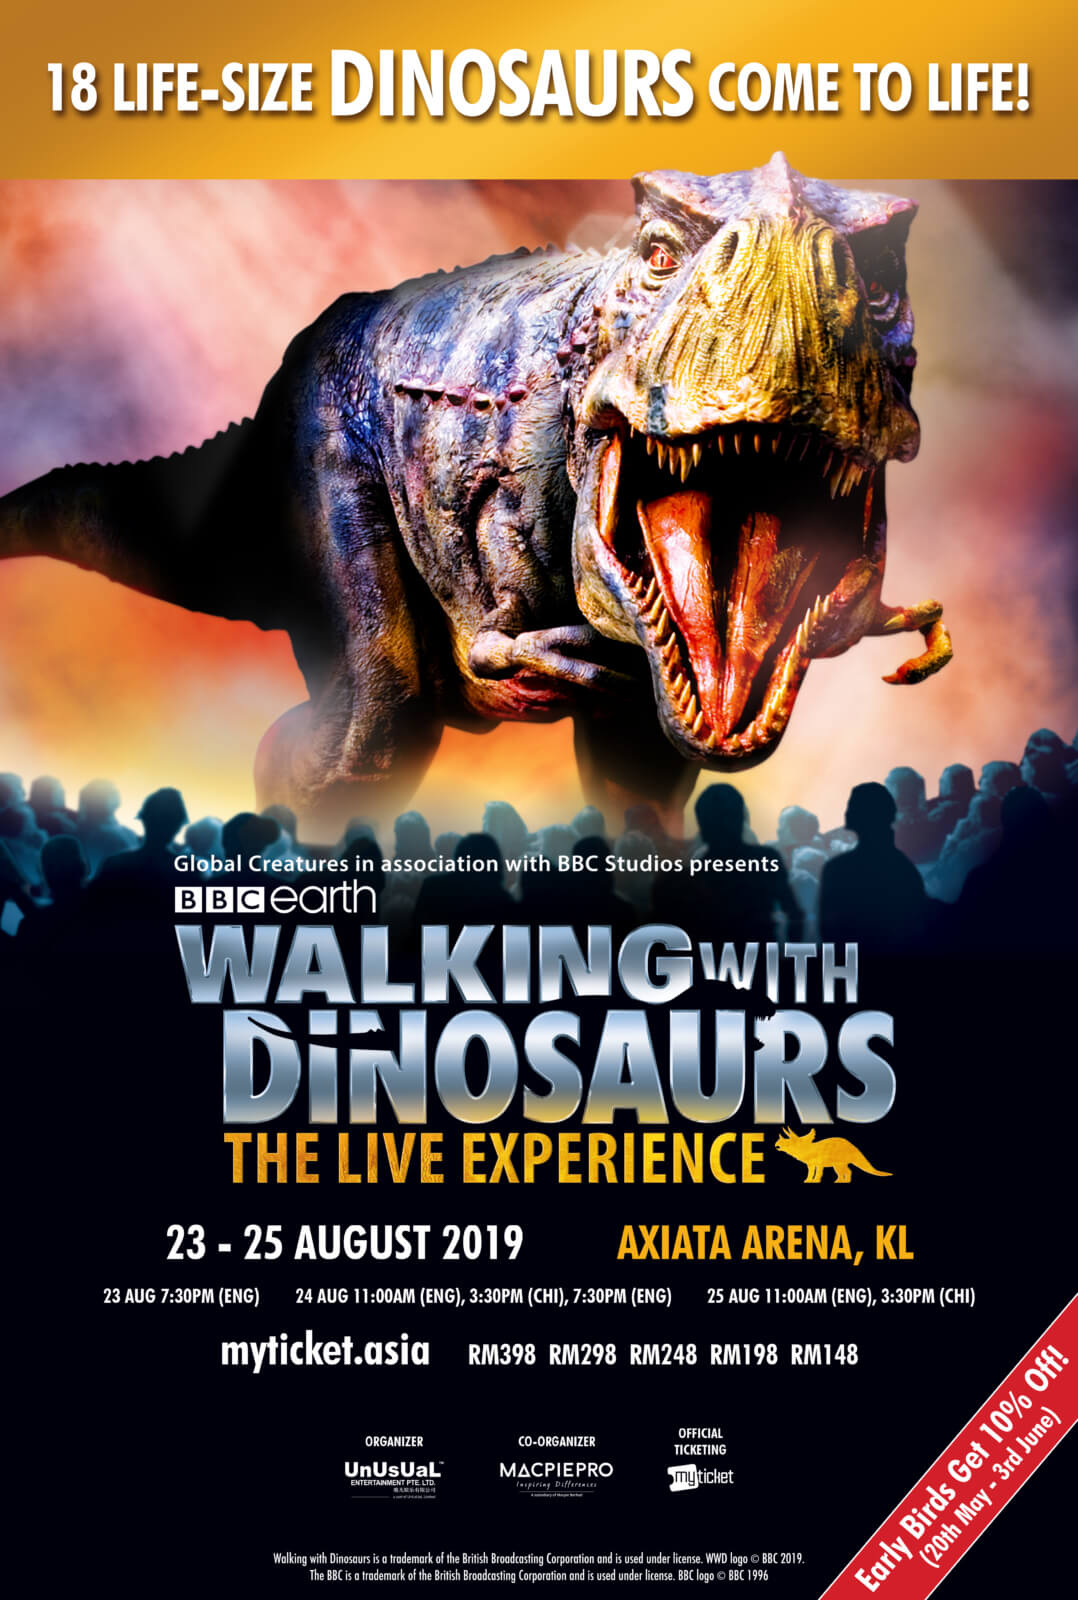 You Will NOT Want to Miss These Super Realistic Dinosaurs in KL This August 2019! - WORLD OF BUZZ 1